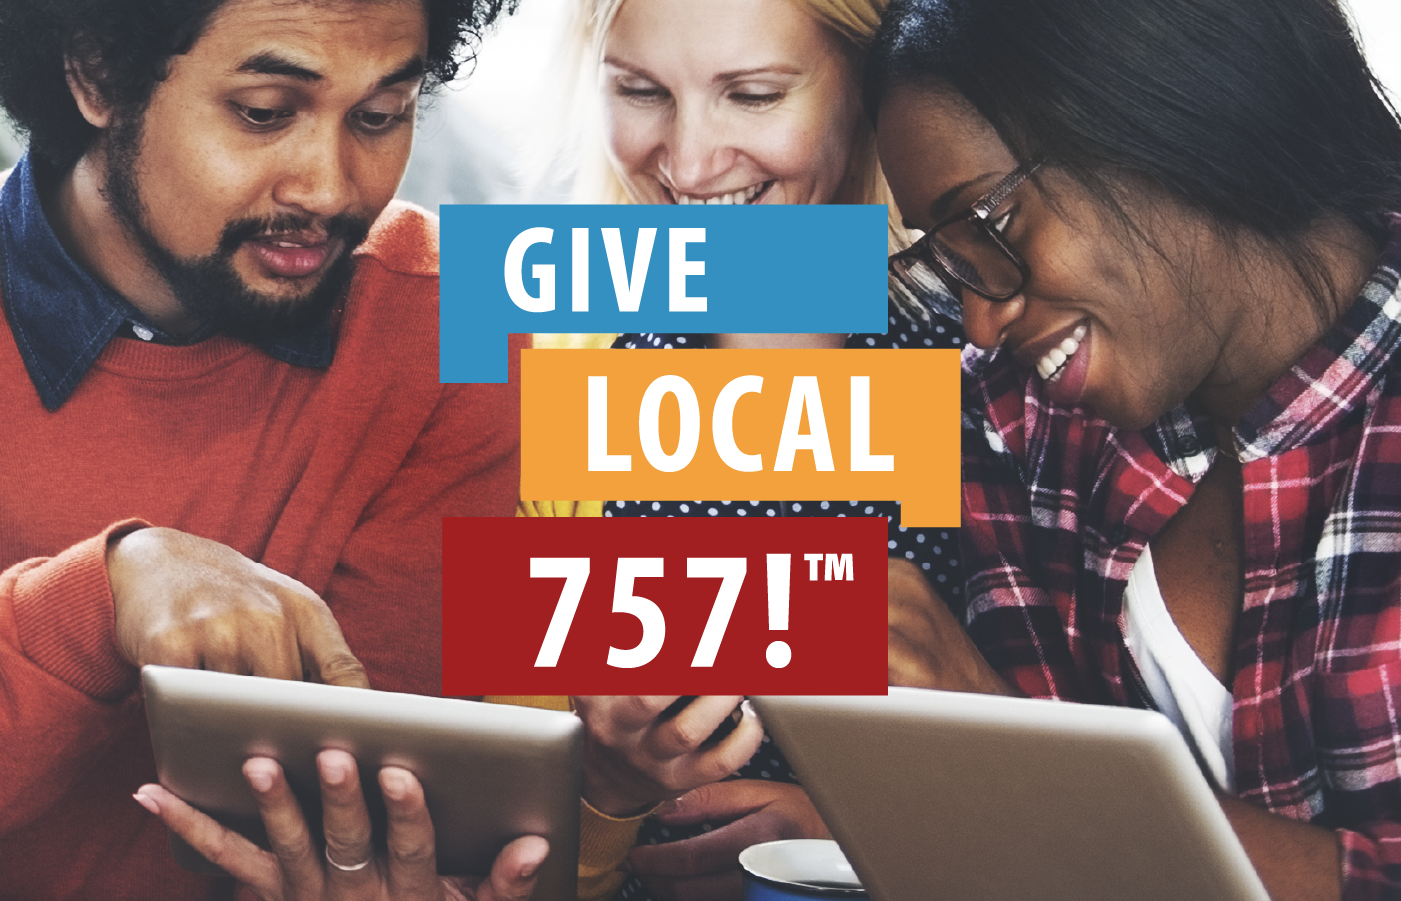 Join Us For Give Local 757!